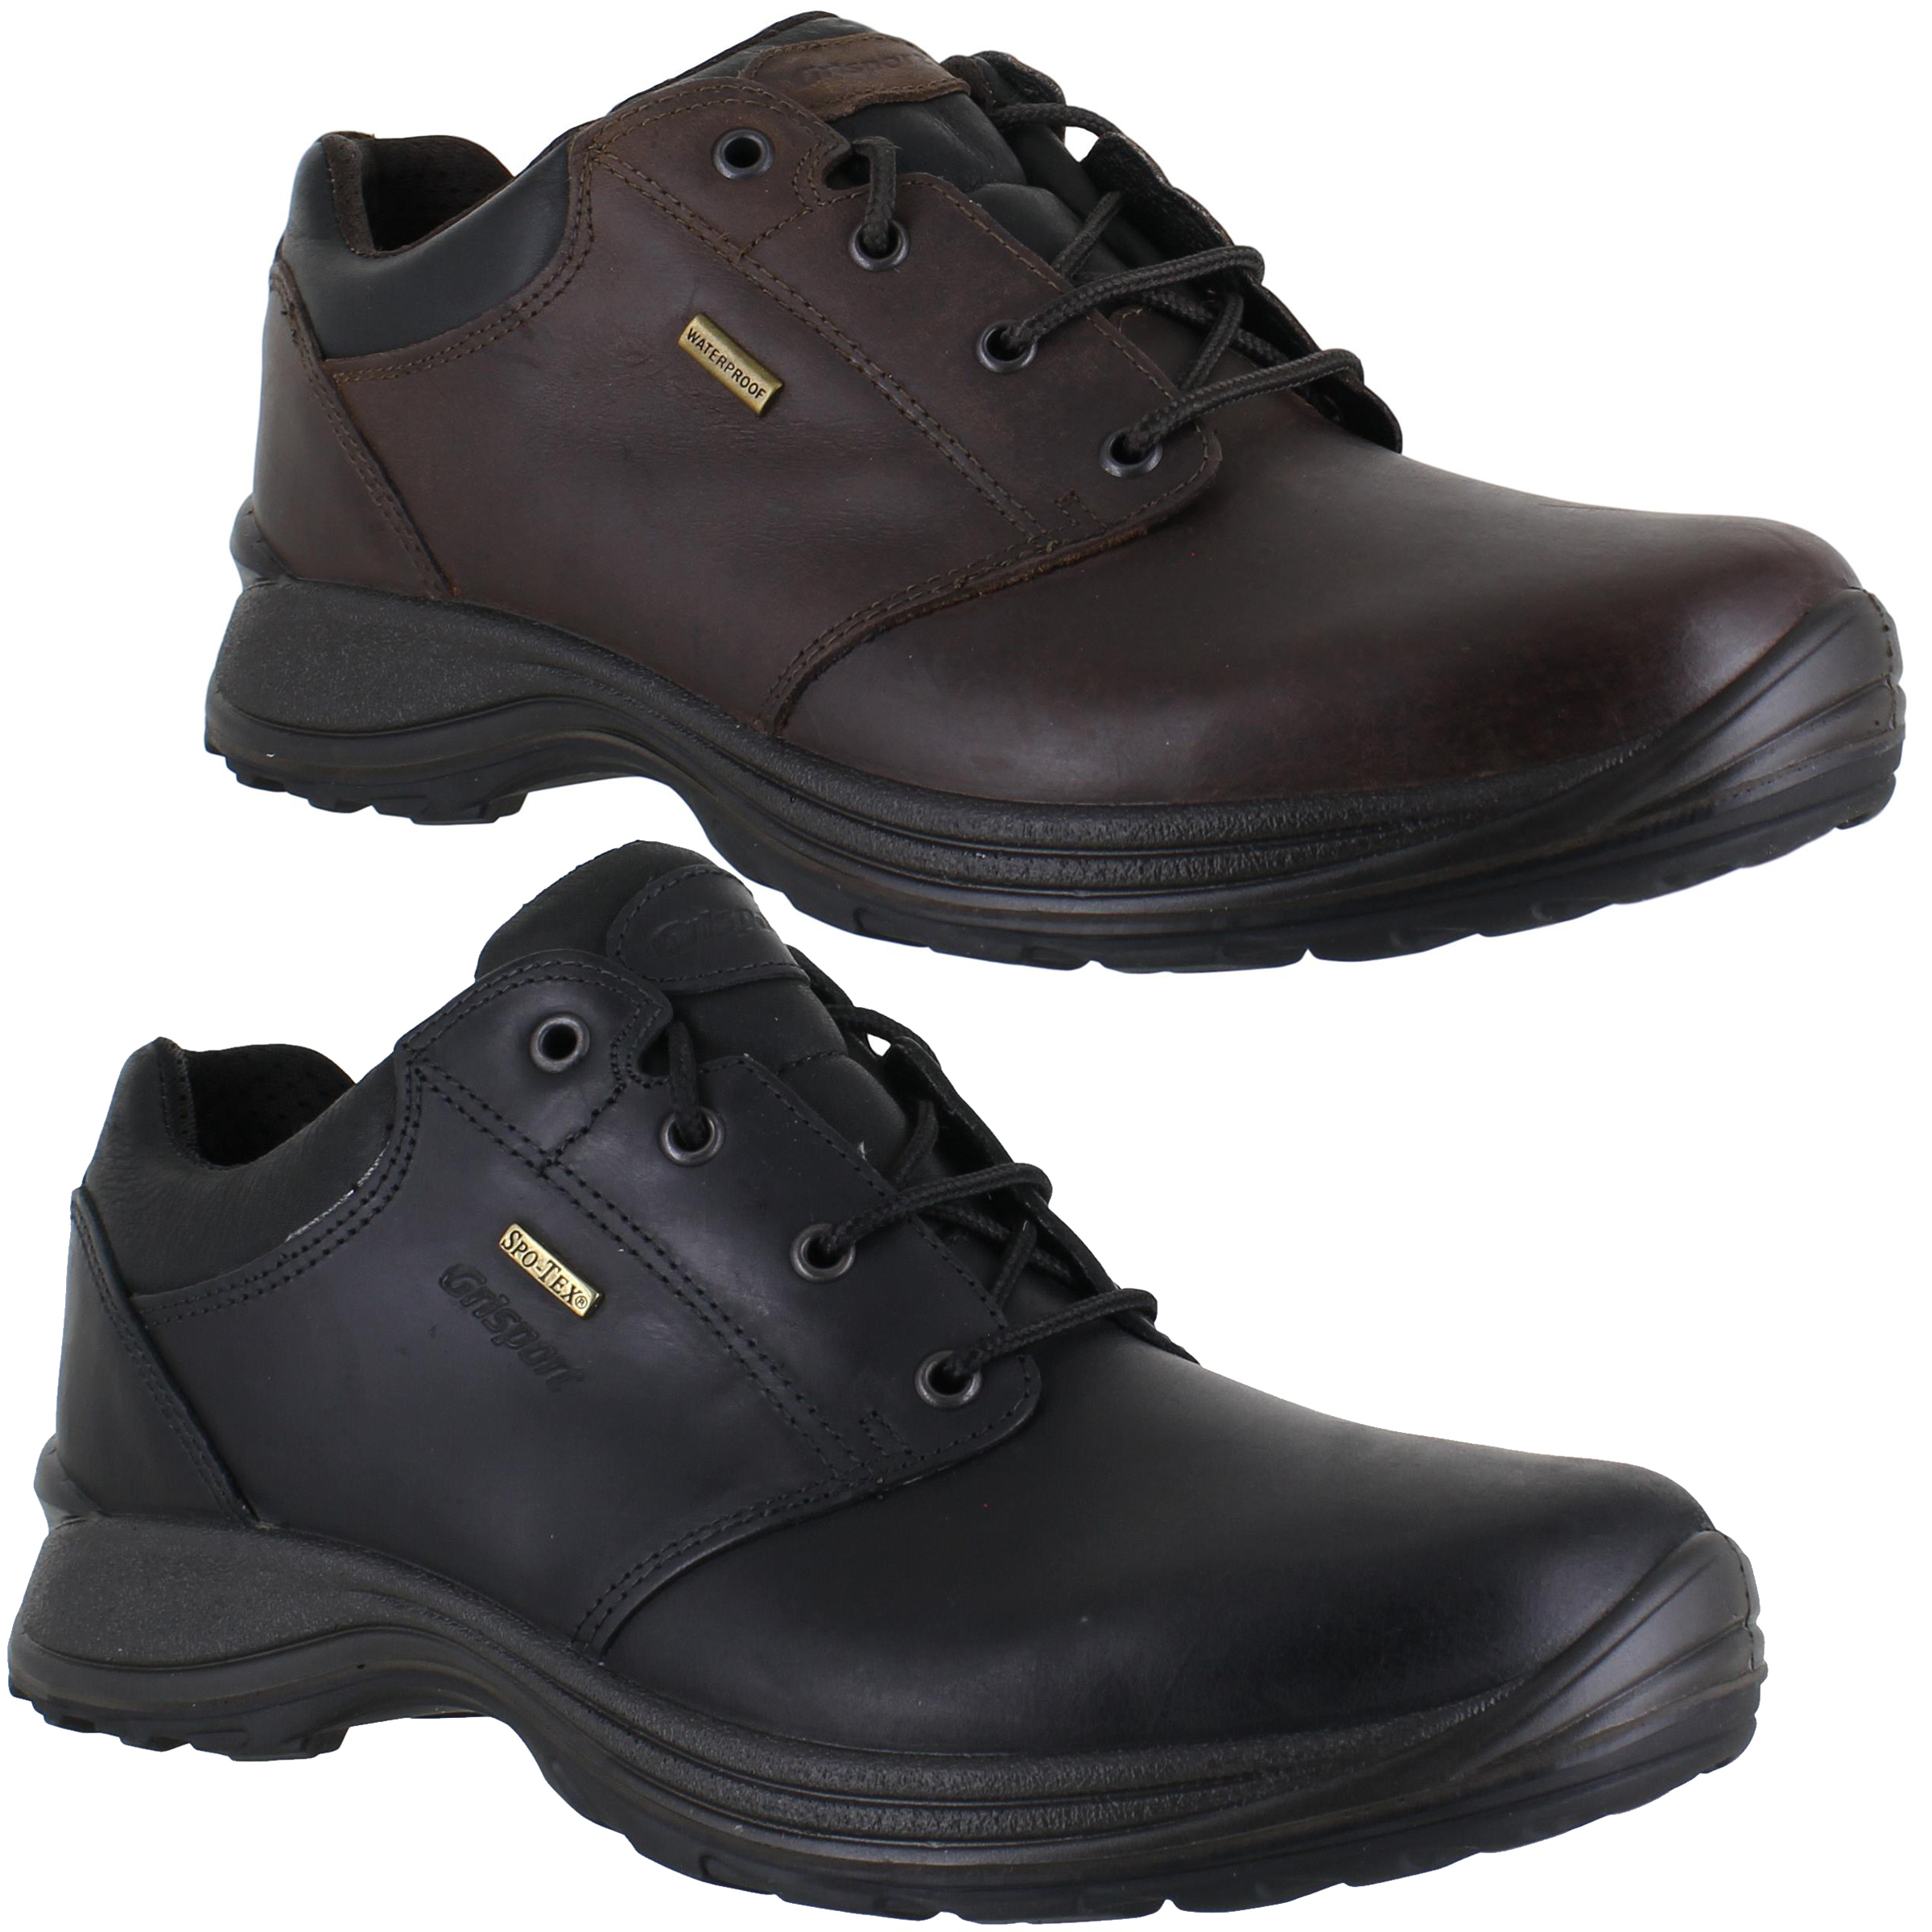 waterroof leather shoes